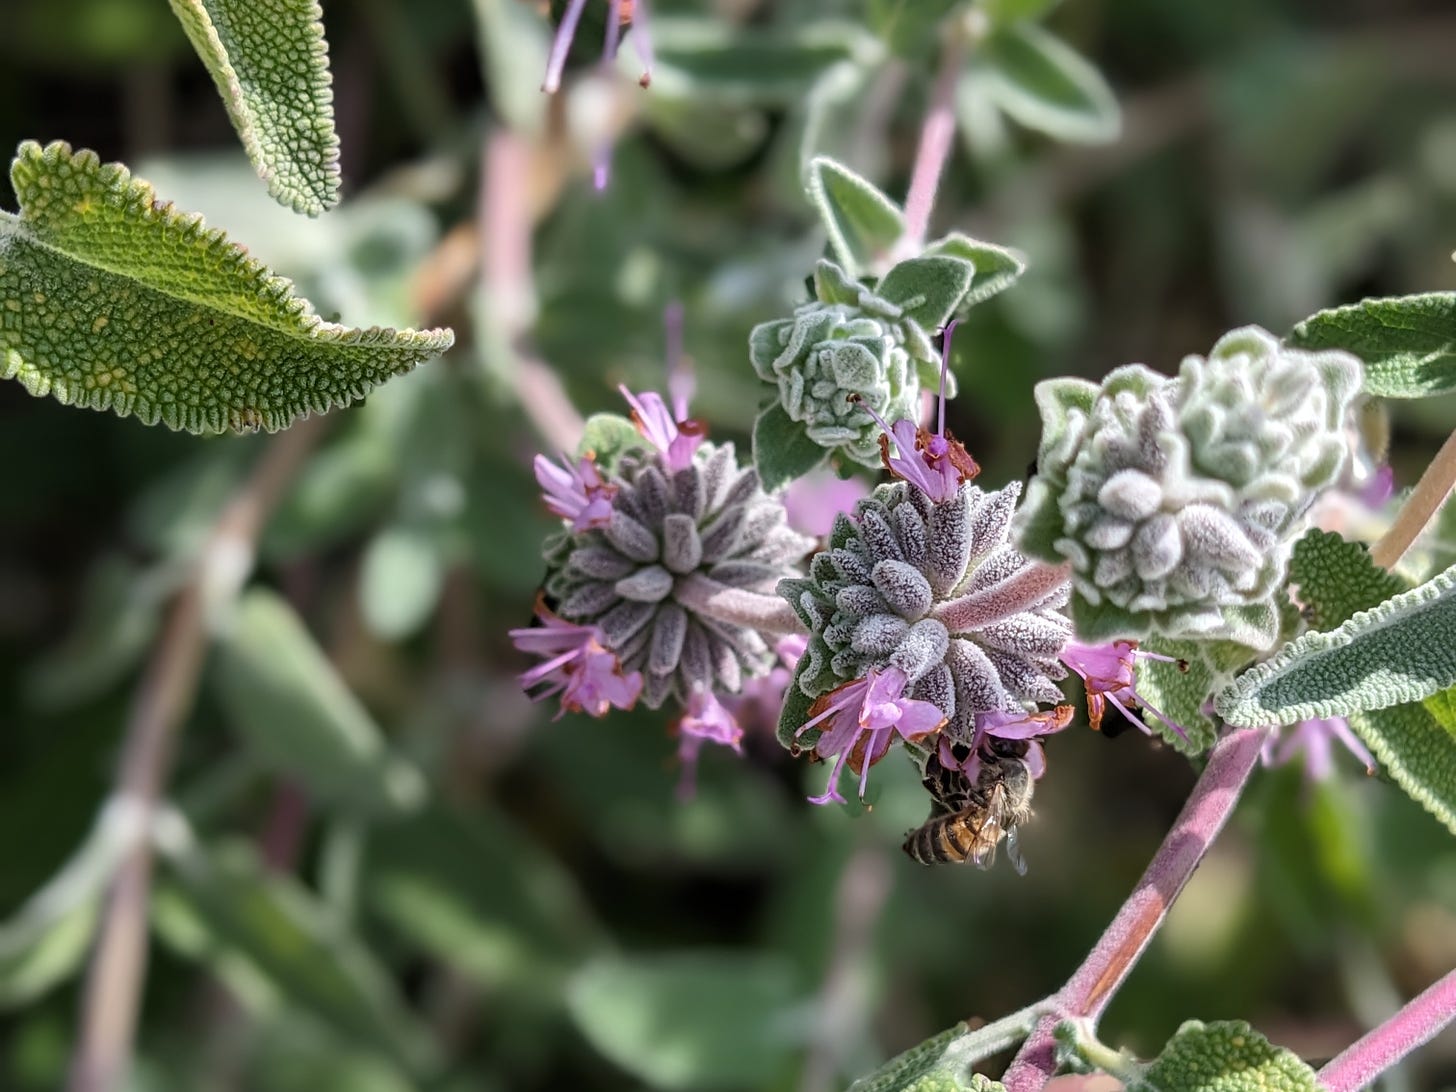 Close-up photograph of a purple sage plant. The plant is silvery-green and fuzzy, with mauve stems. There are clusters of buds and a bee is nuzzling itself into a light purple-pink flower.